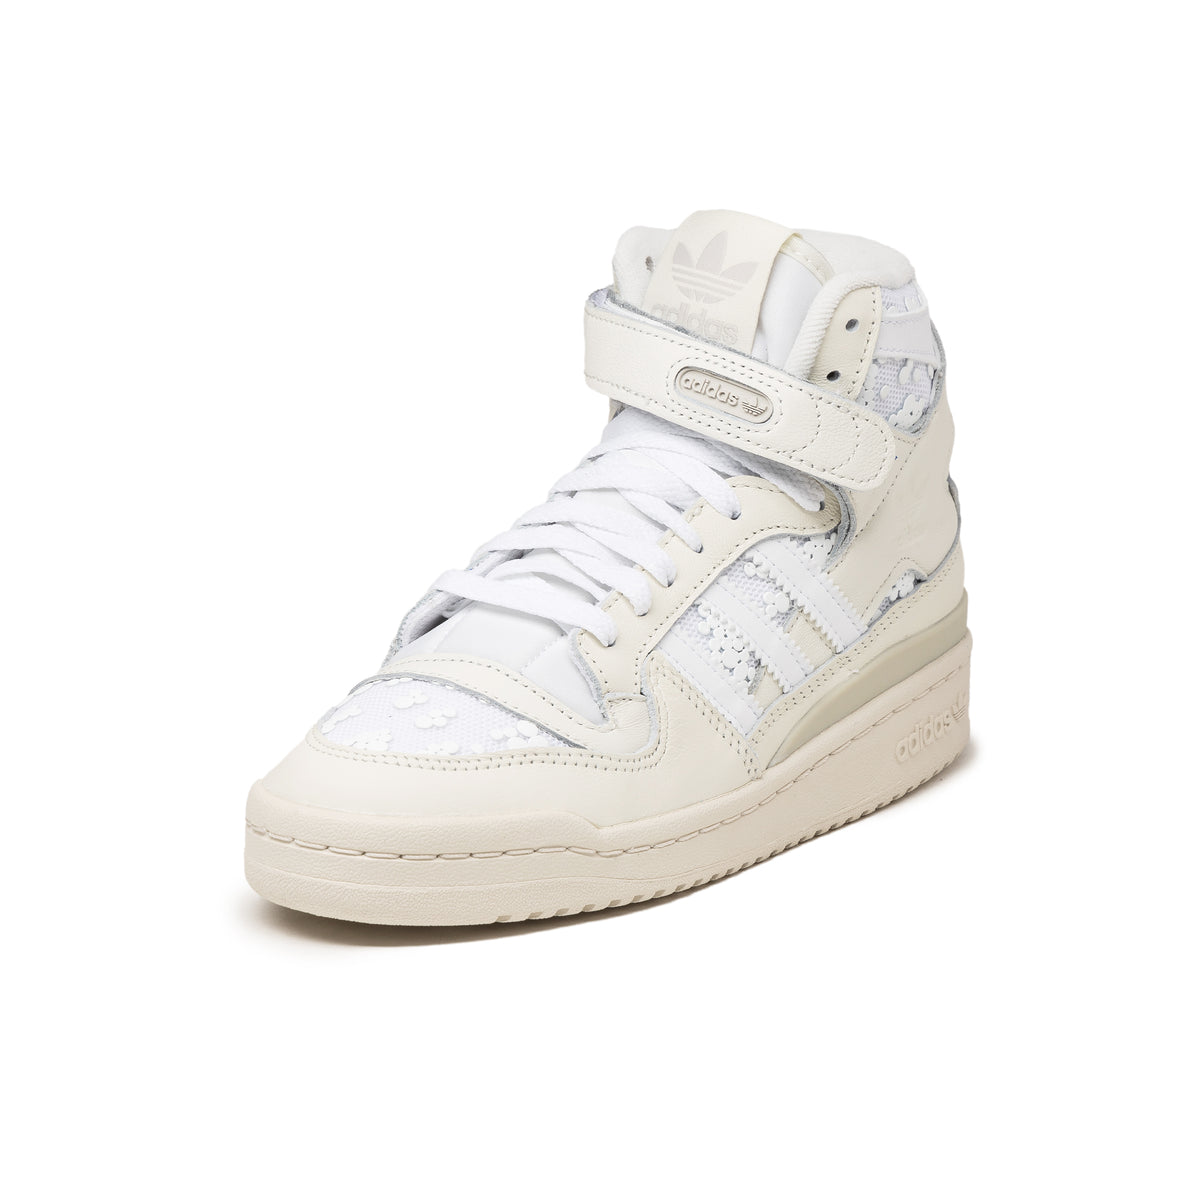 Adidas Forum 84 High W – buy now at Asphaltgold Online Store!